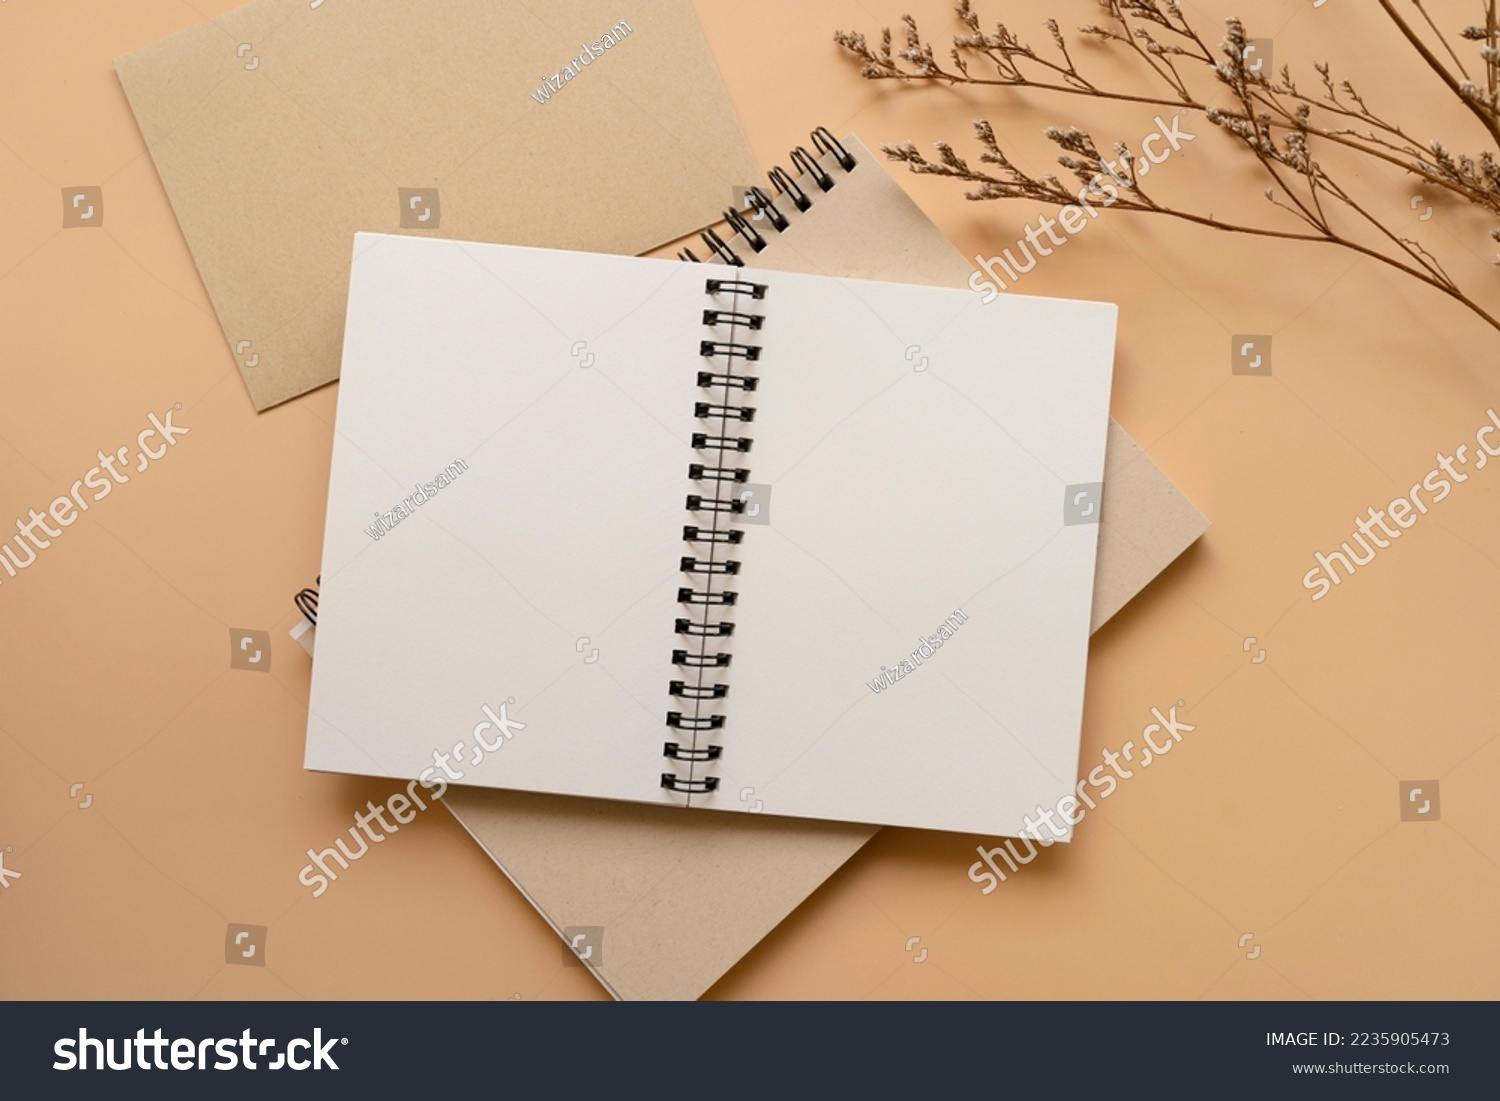 Notebook, A5, A6, metal ring bind, with white cream paper, with dried flowers and envelope. Stationary mockup template.  #2235905473